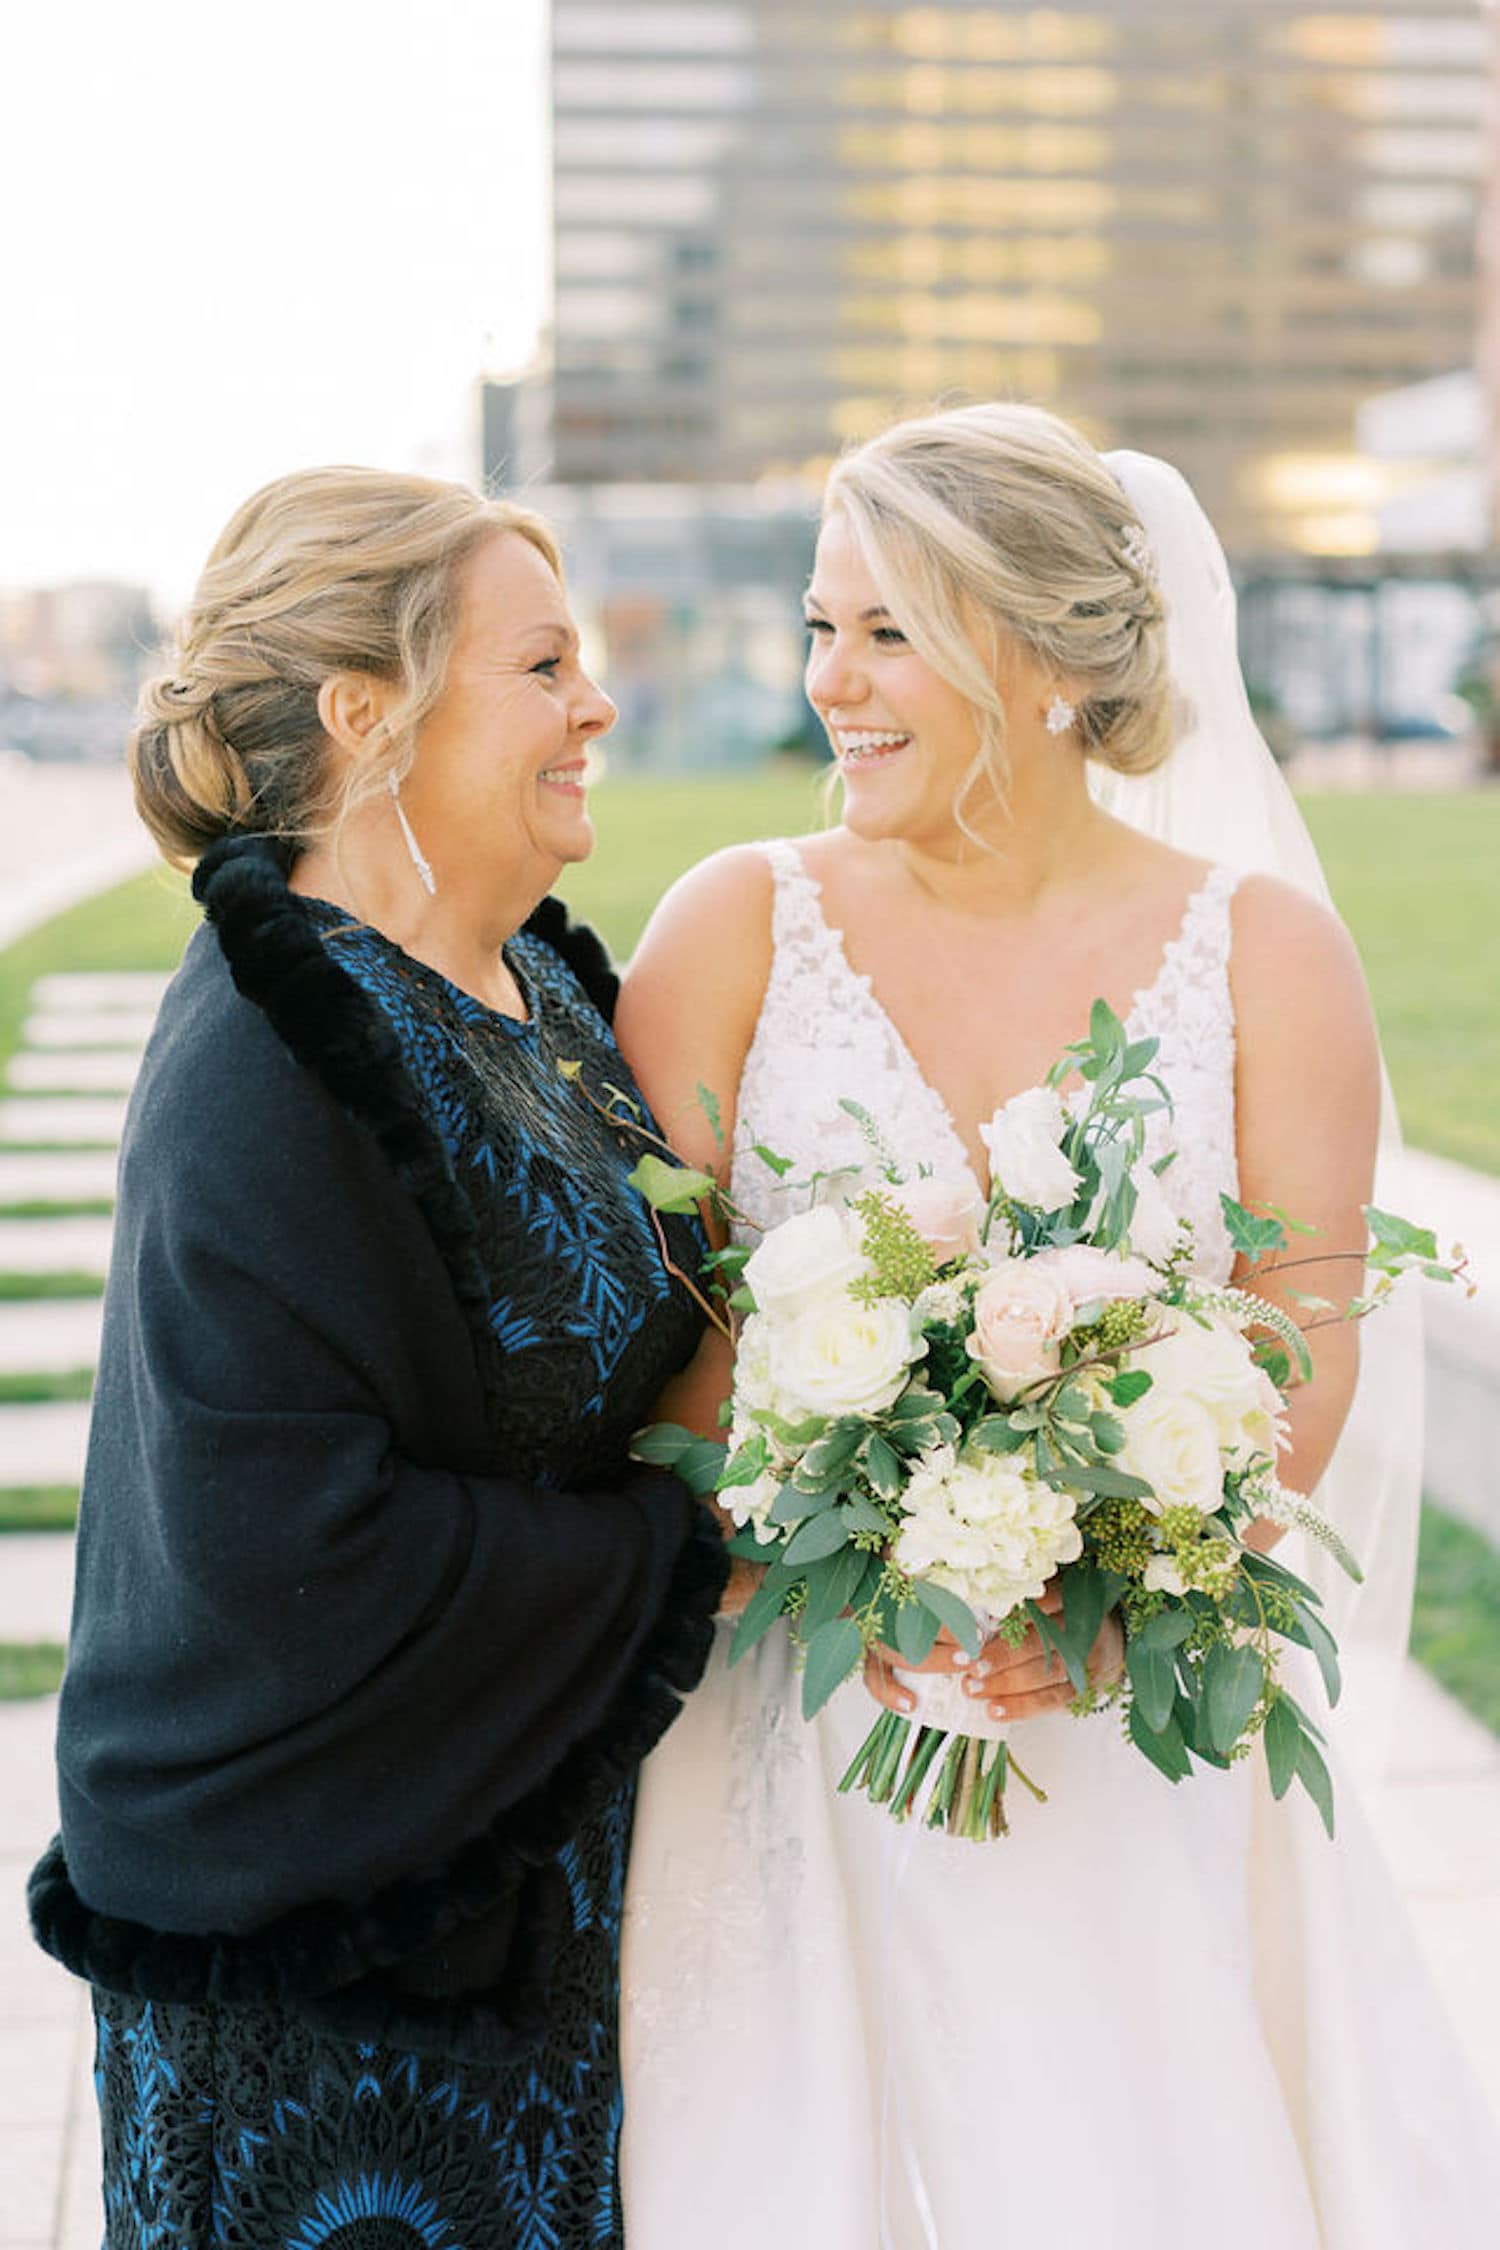 A bride and her mom smile during a family wedding photo as an example of Family Wedding Photos: How to do them Right. Photograph by Marcela Plosker, Boston Massachusetts wedding photographer.